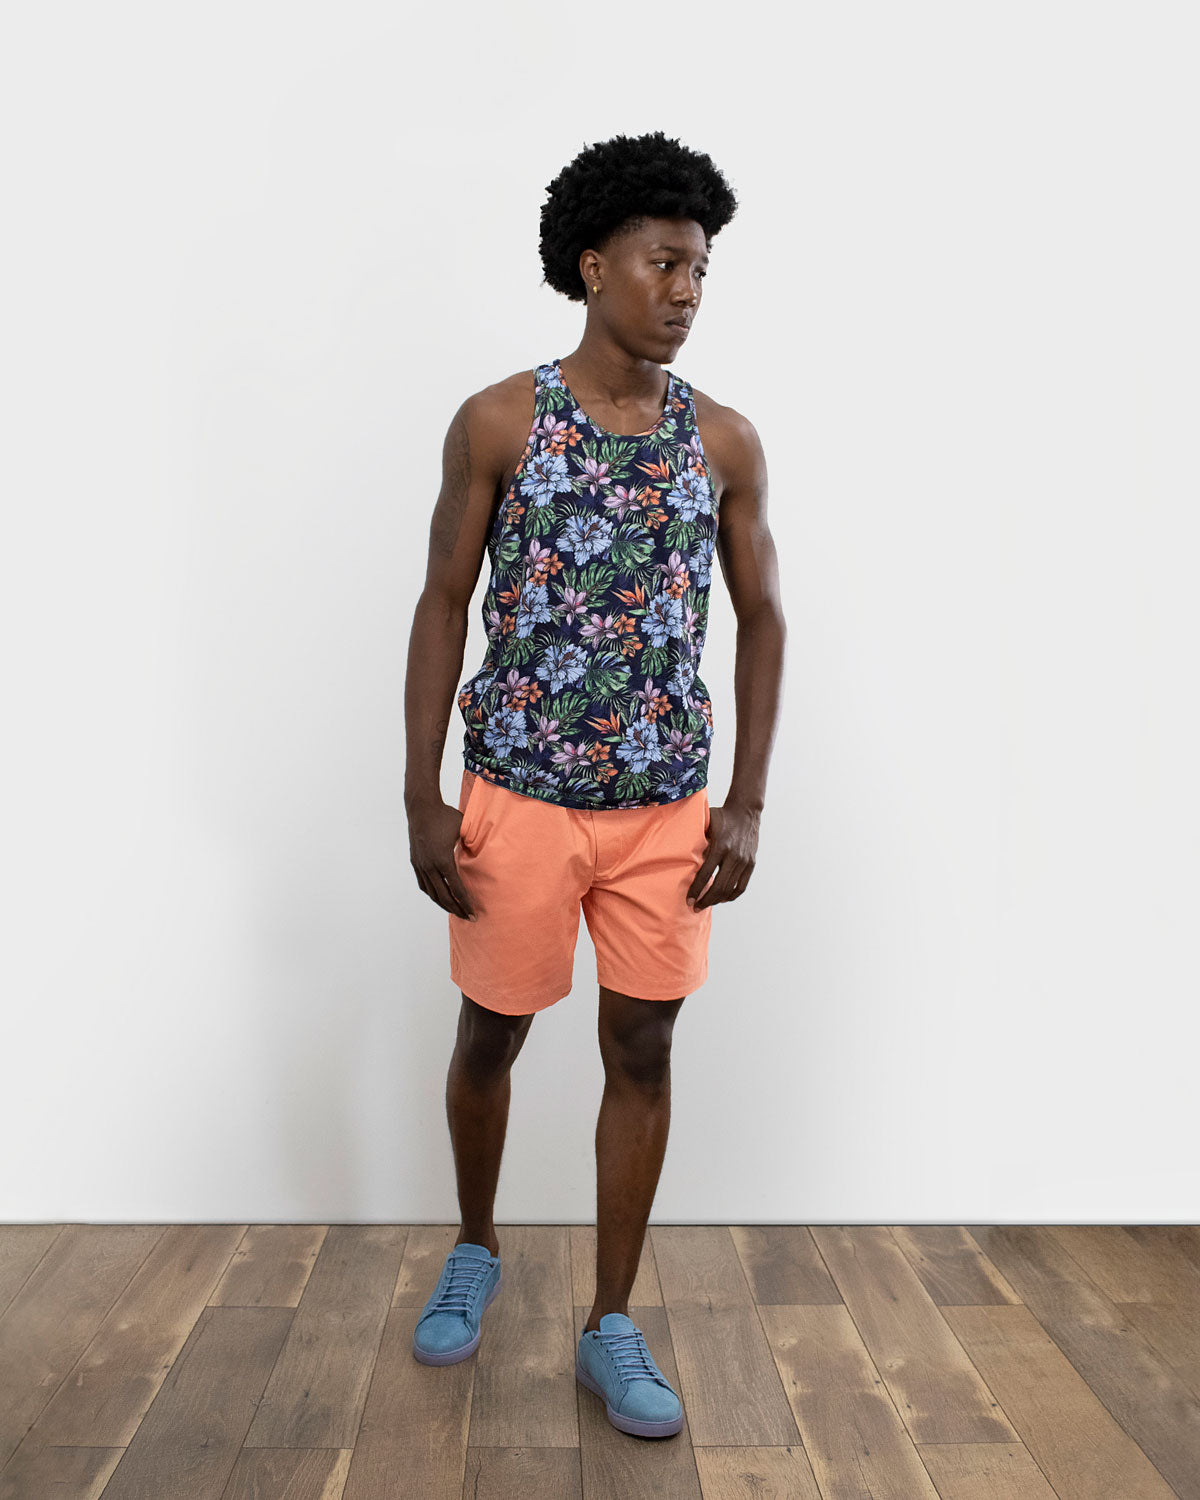 TEDFORD TANK COLORFUL FLORAL NAVY